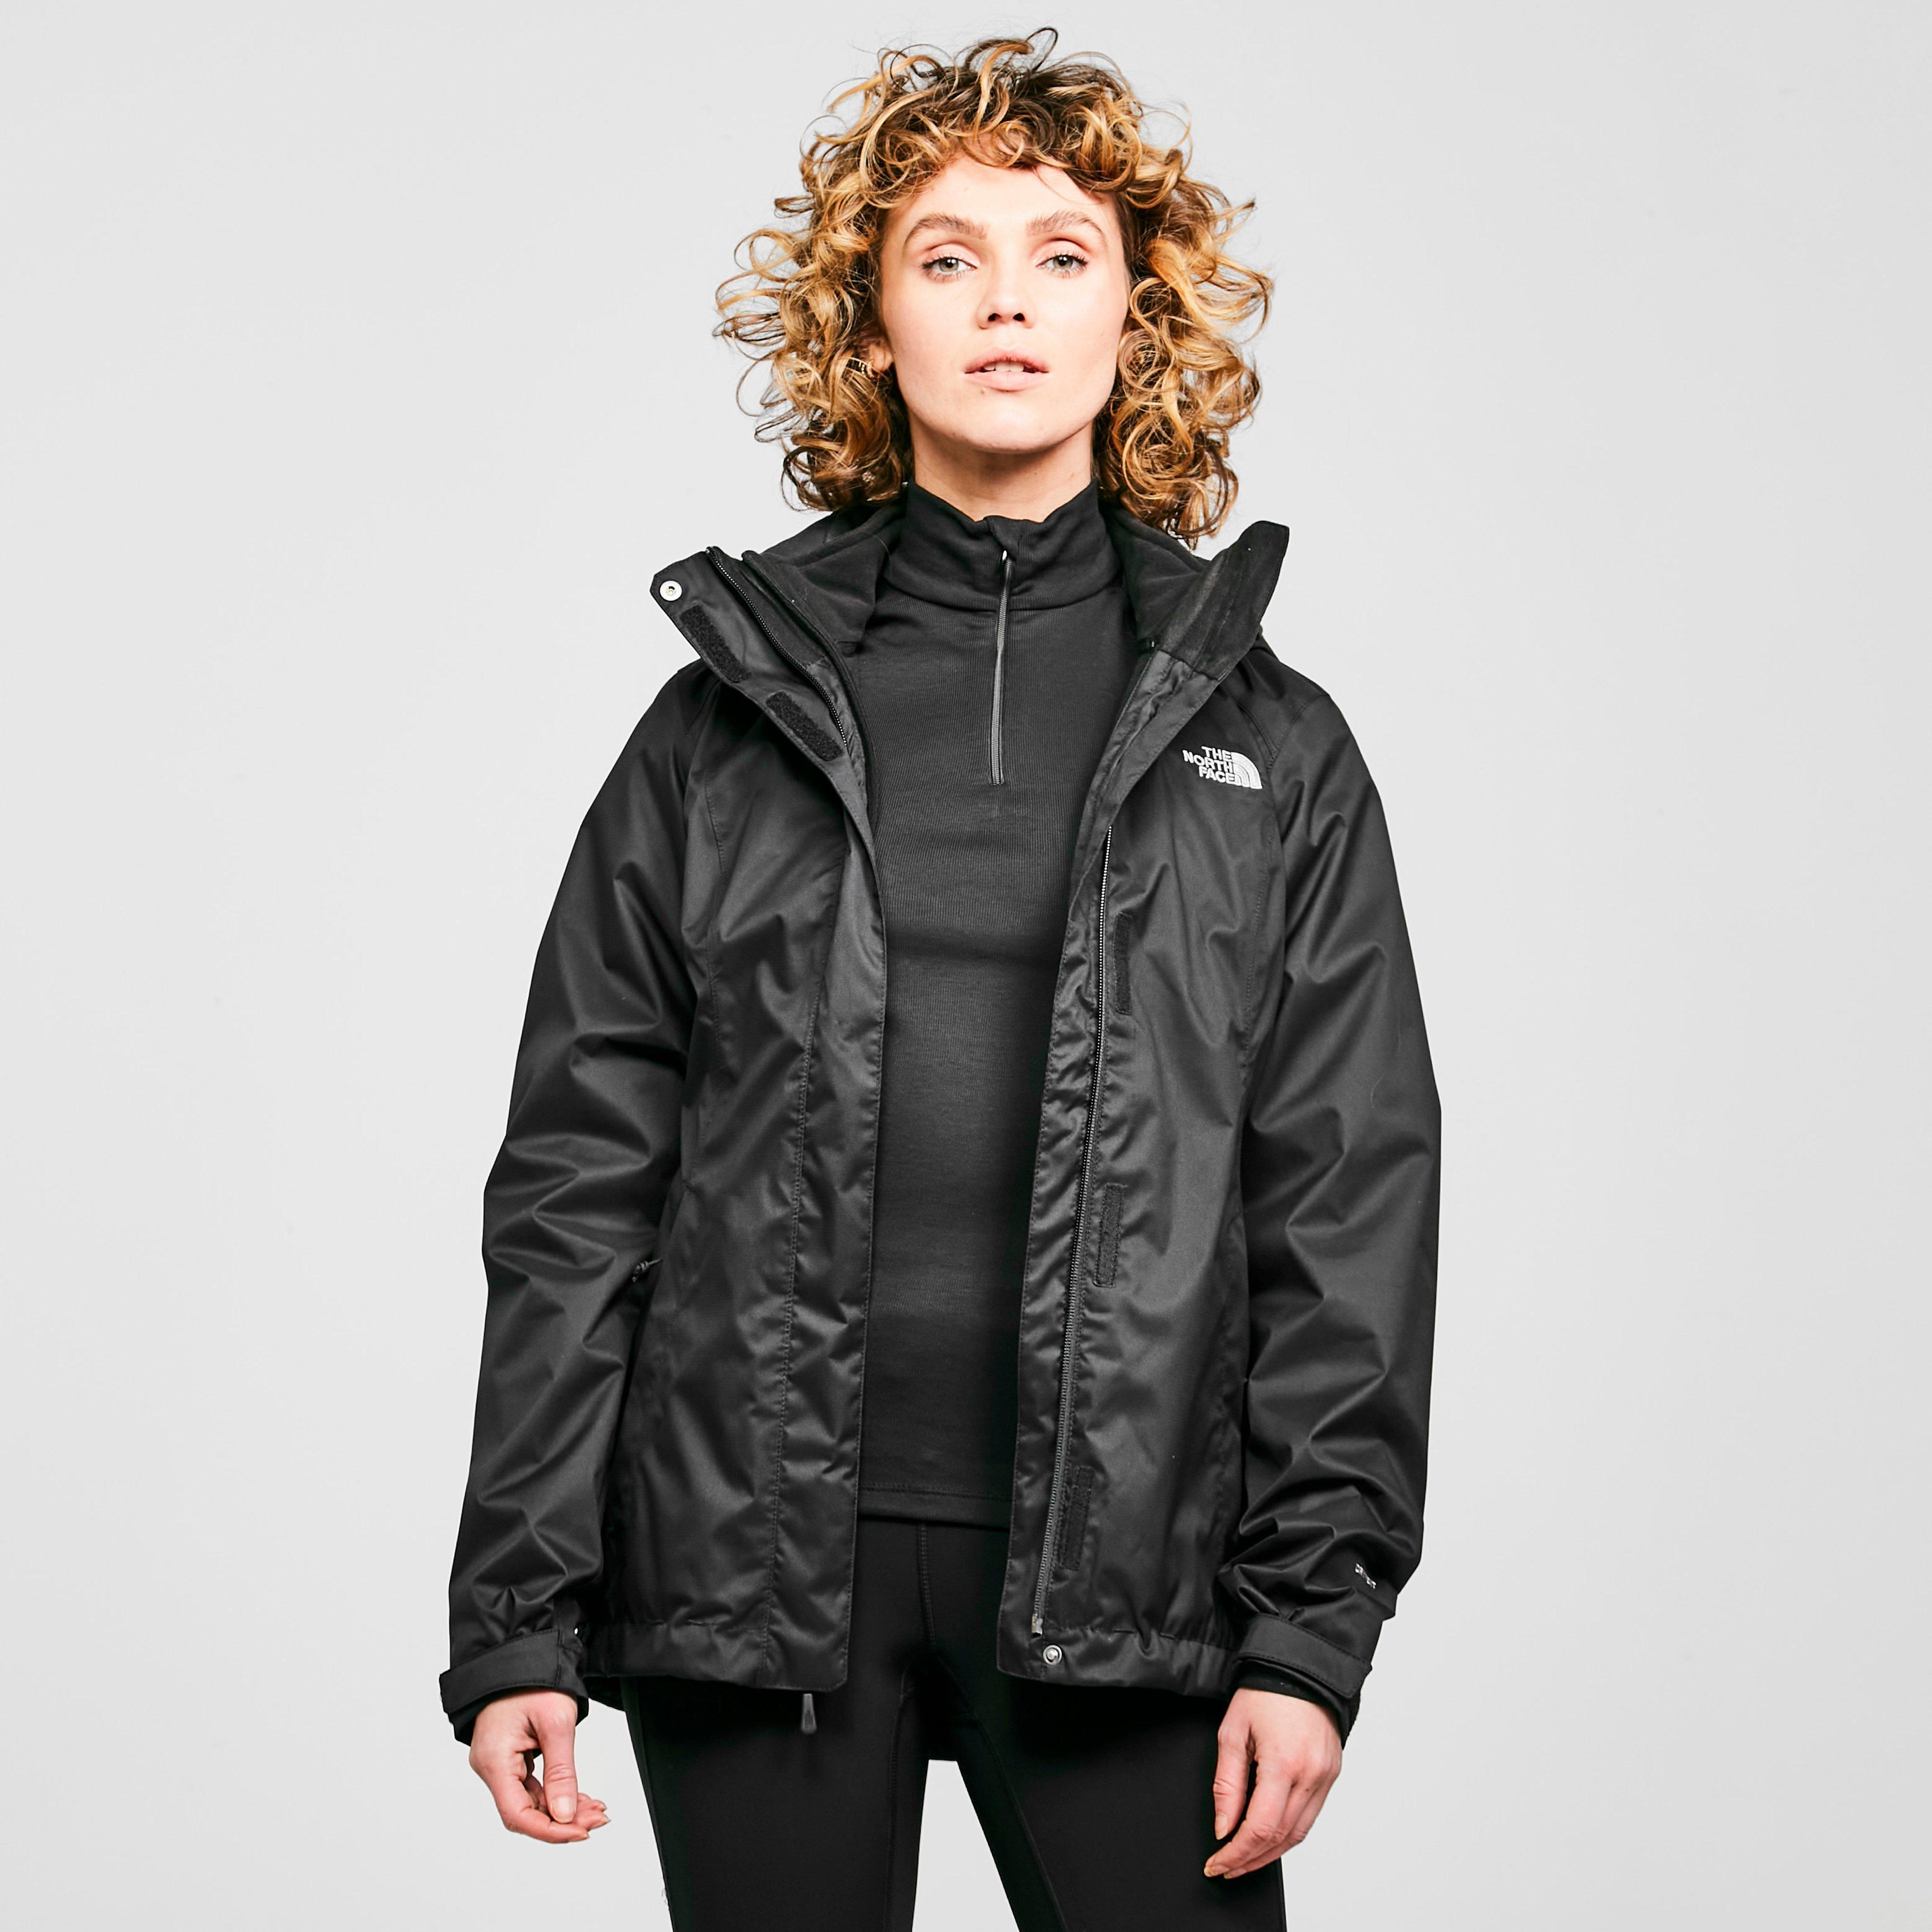 Style north face jackets on sale in usa women ebay brand